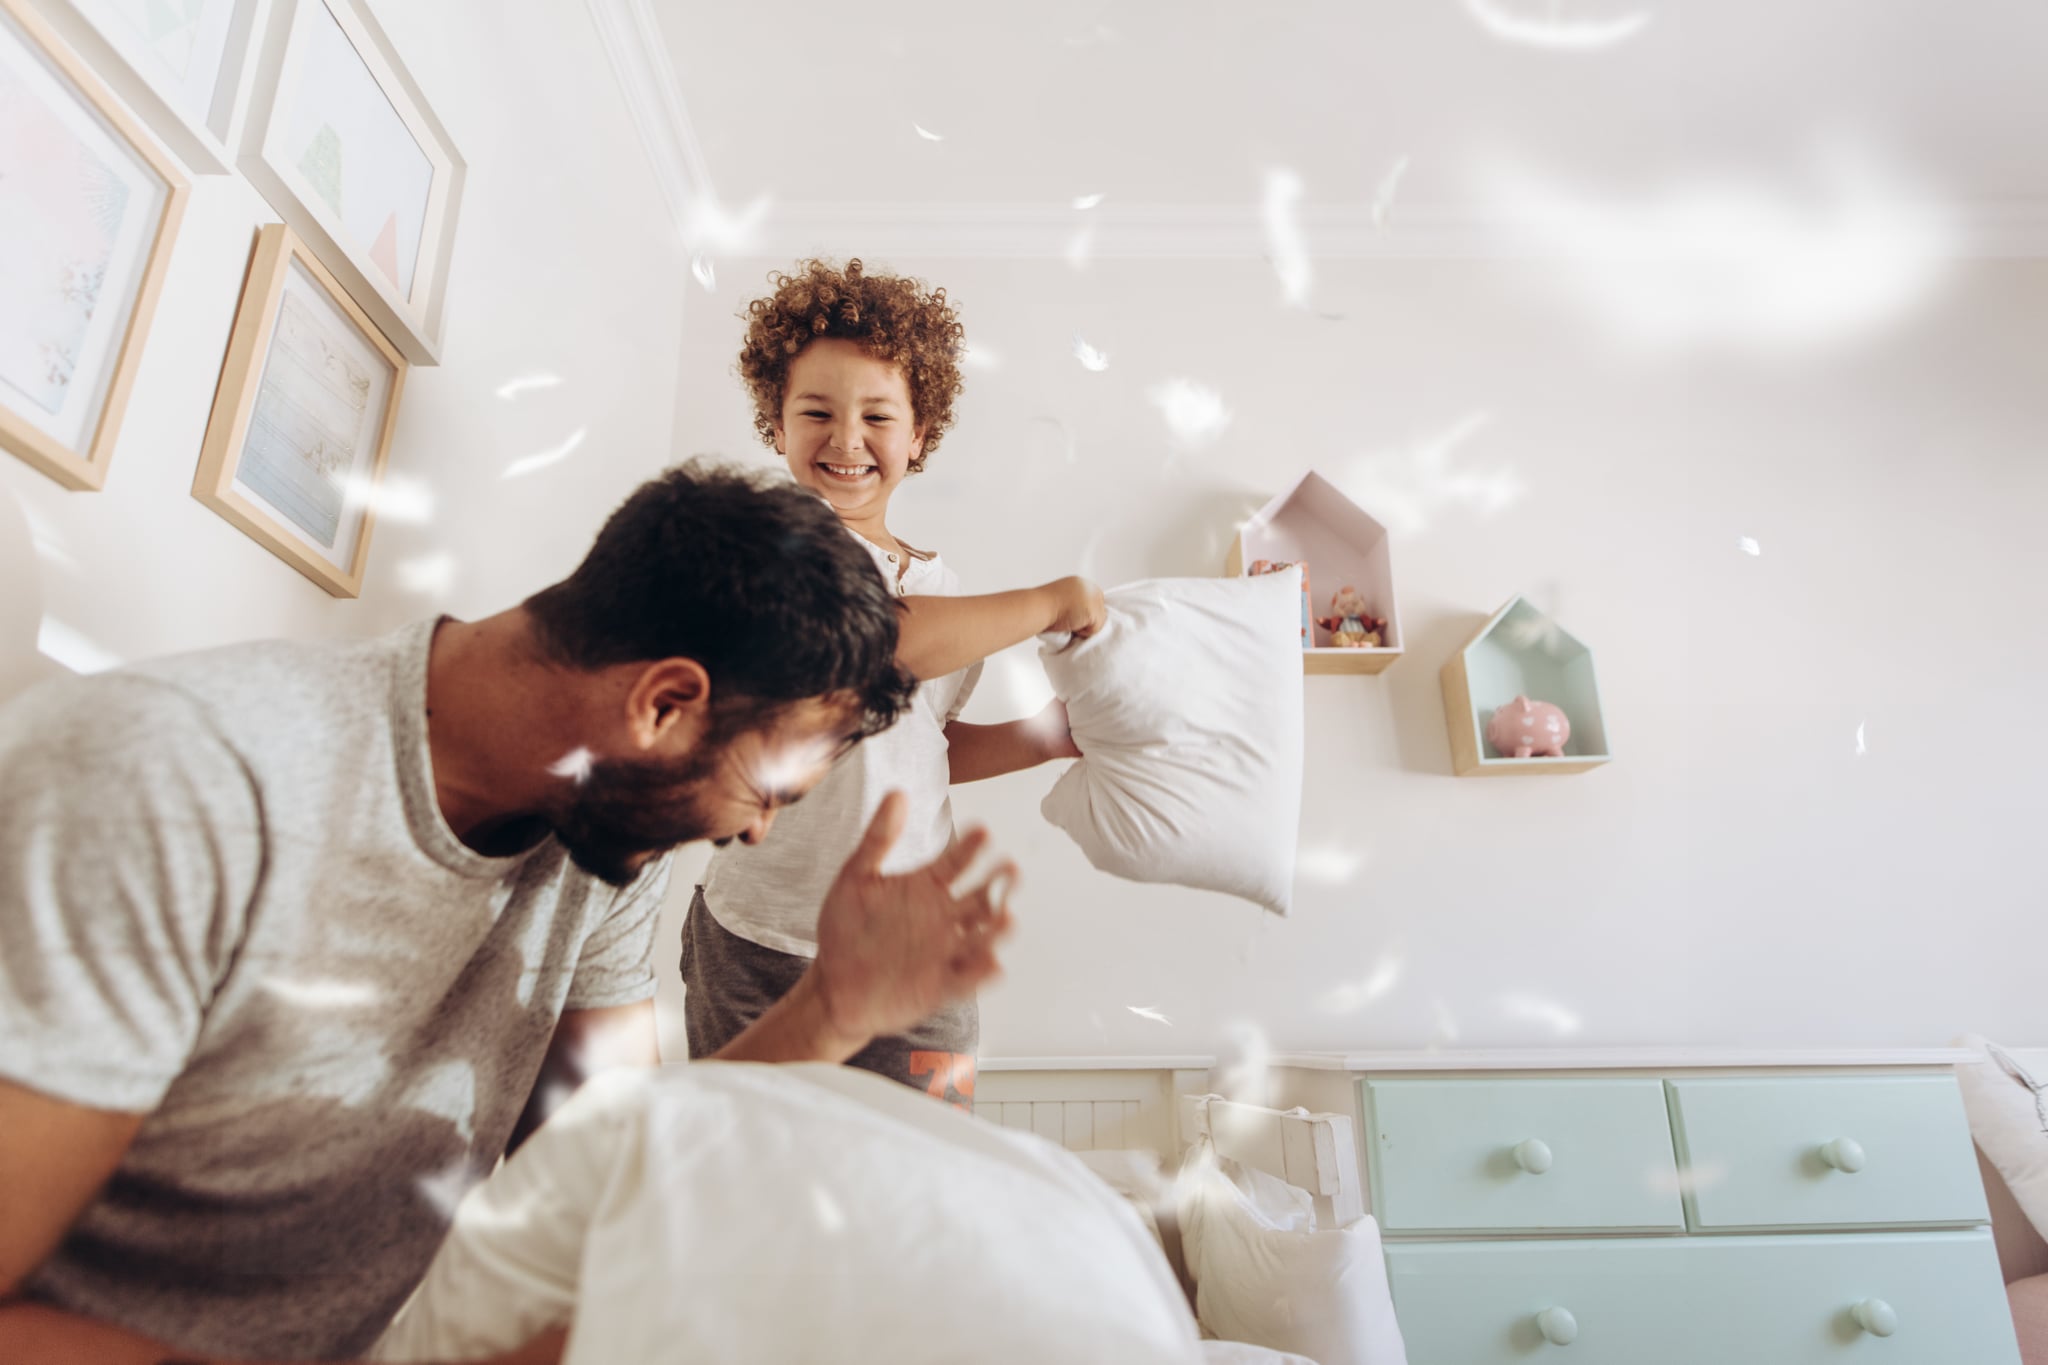 <p>While we generally discourage hitting one another, pillow fights can be a fun way to pass the time. This quintessential family activity is best left for kids old enough to understand the need to be gentle and stop when someone says so.</p>